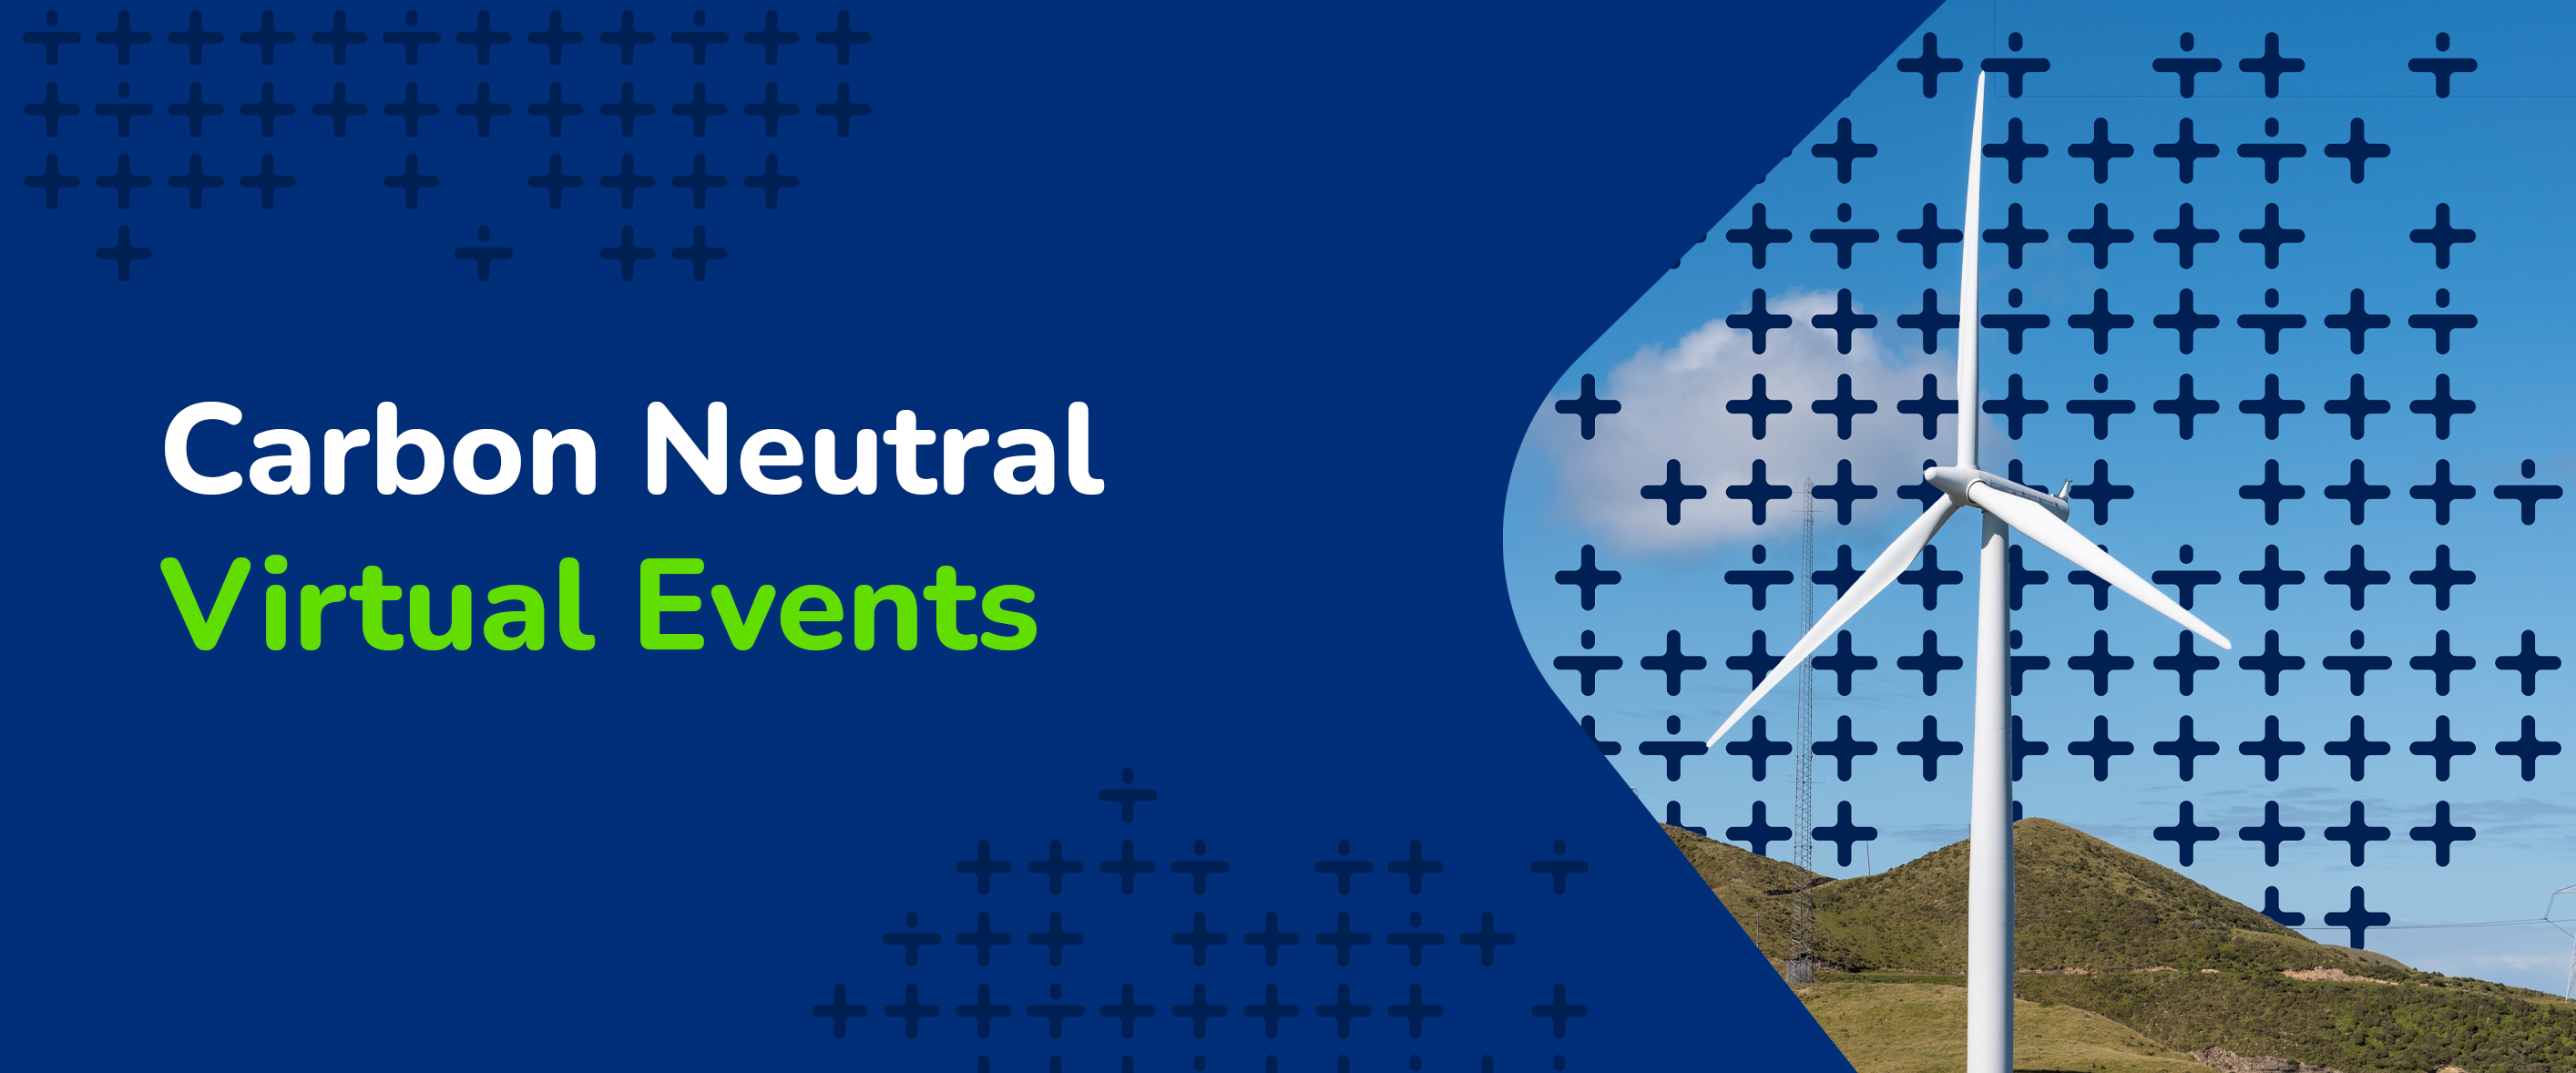 Carbon neutral virtual events - sustainable virtuale events - MEETYOO